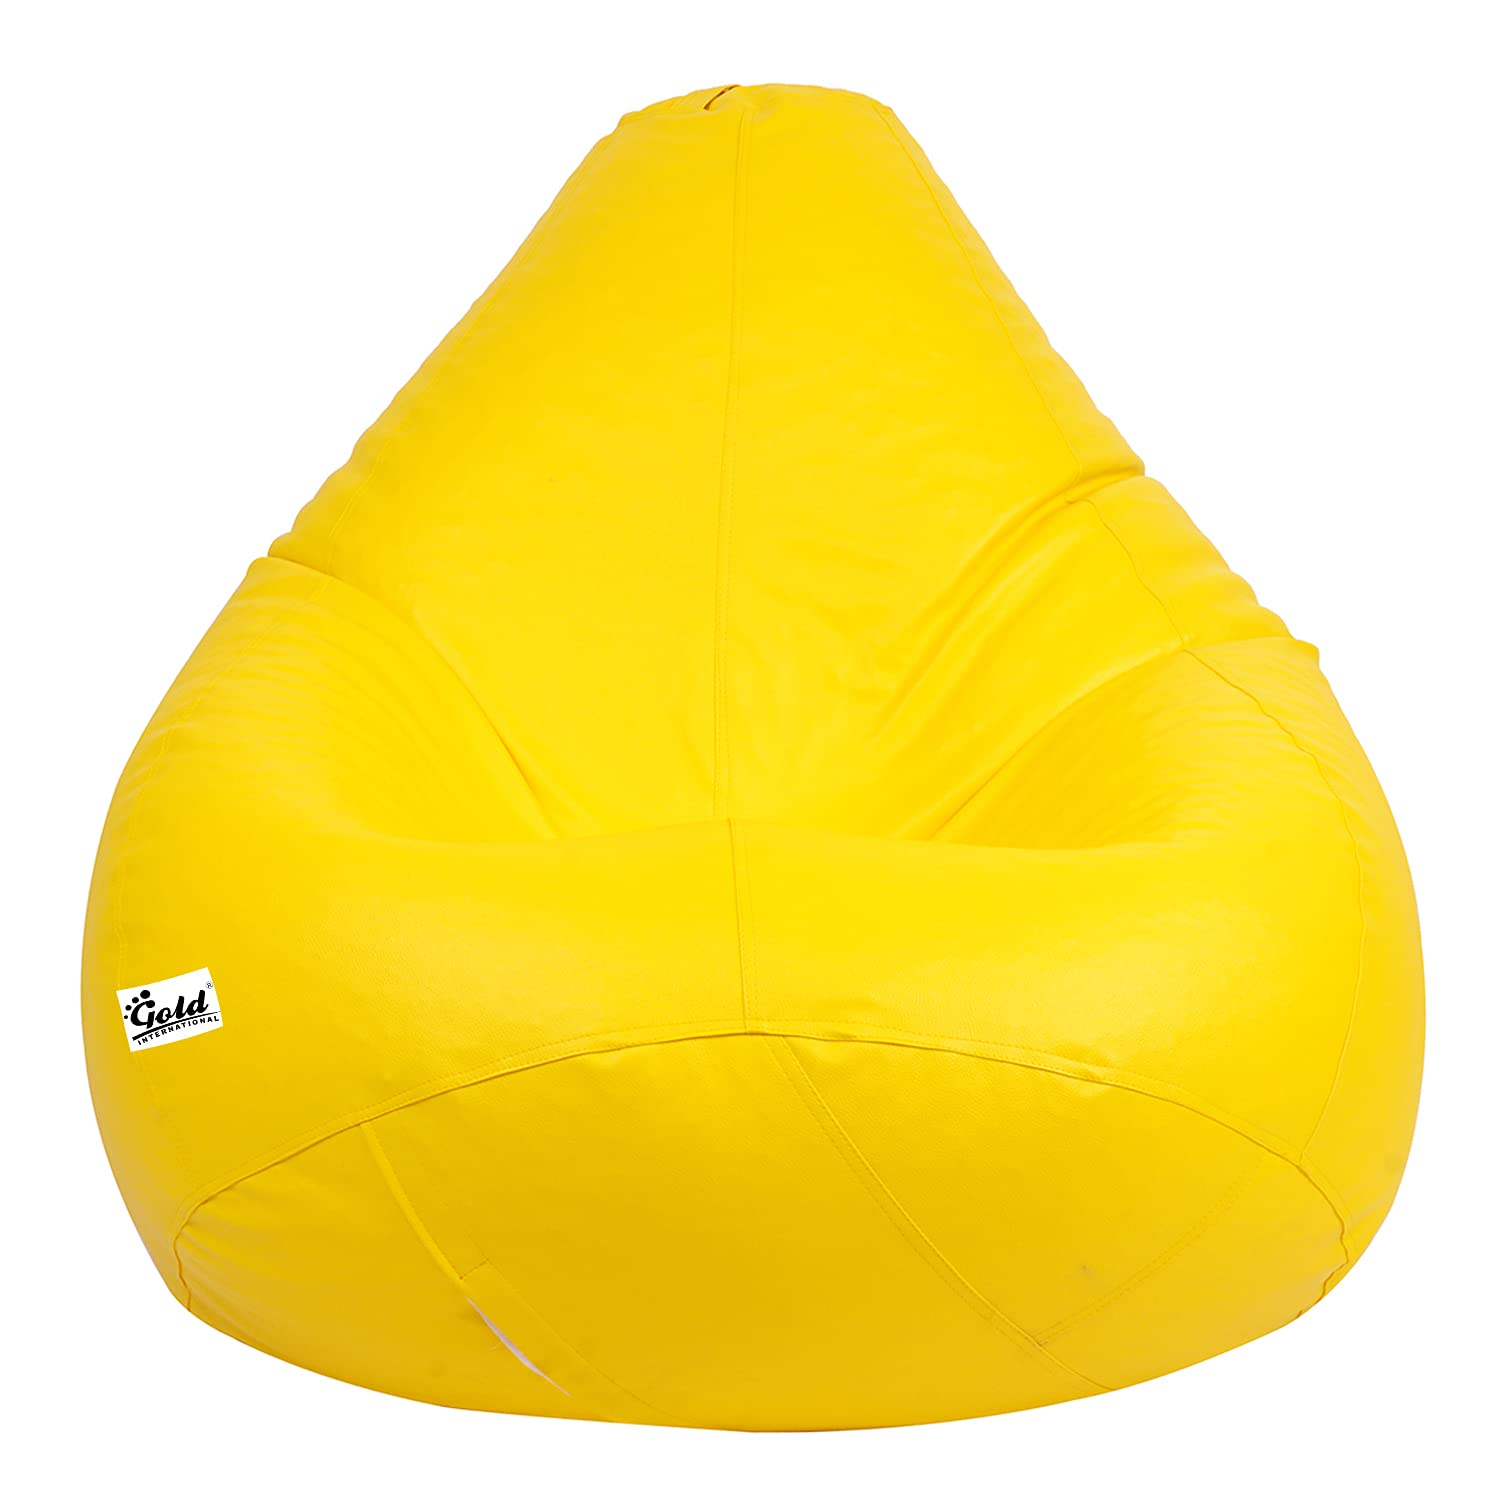 Gold Classic Teardrop Shape Bean Bag Filled with Beans